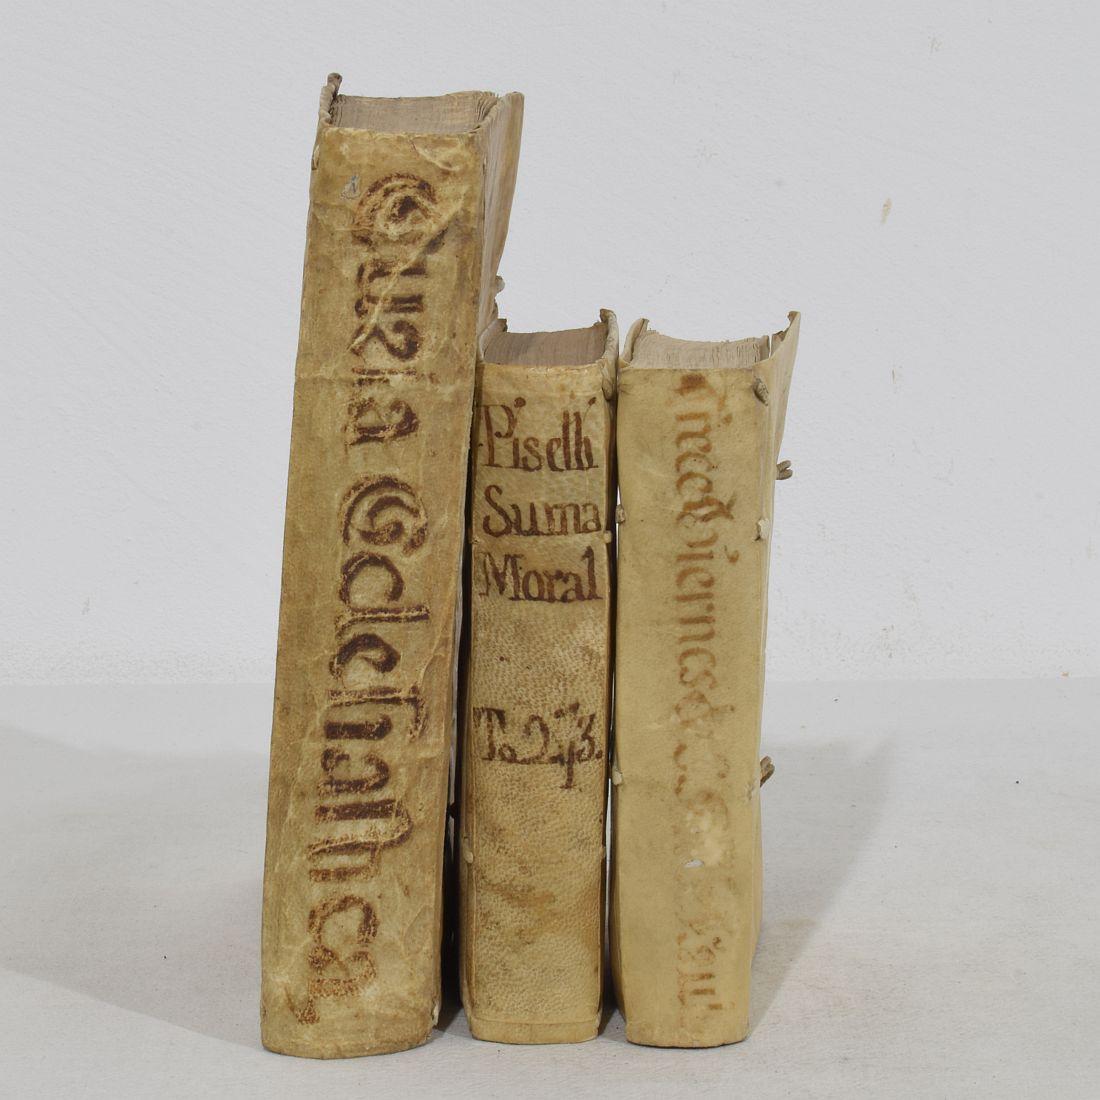 Nice collection of three extremely weathered vellum books, Spain/ Italy 18th century. Weathered and small losses
Measures: H:15-20cm  W:3-4cm D:9-16cm 
Measurements here below of the largest book.